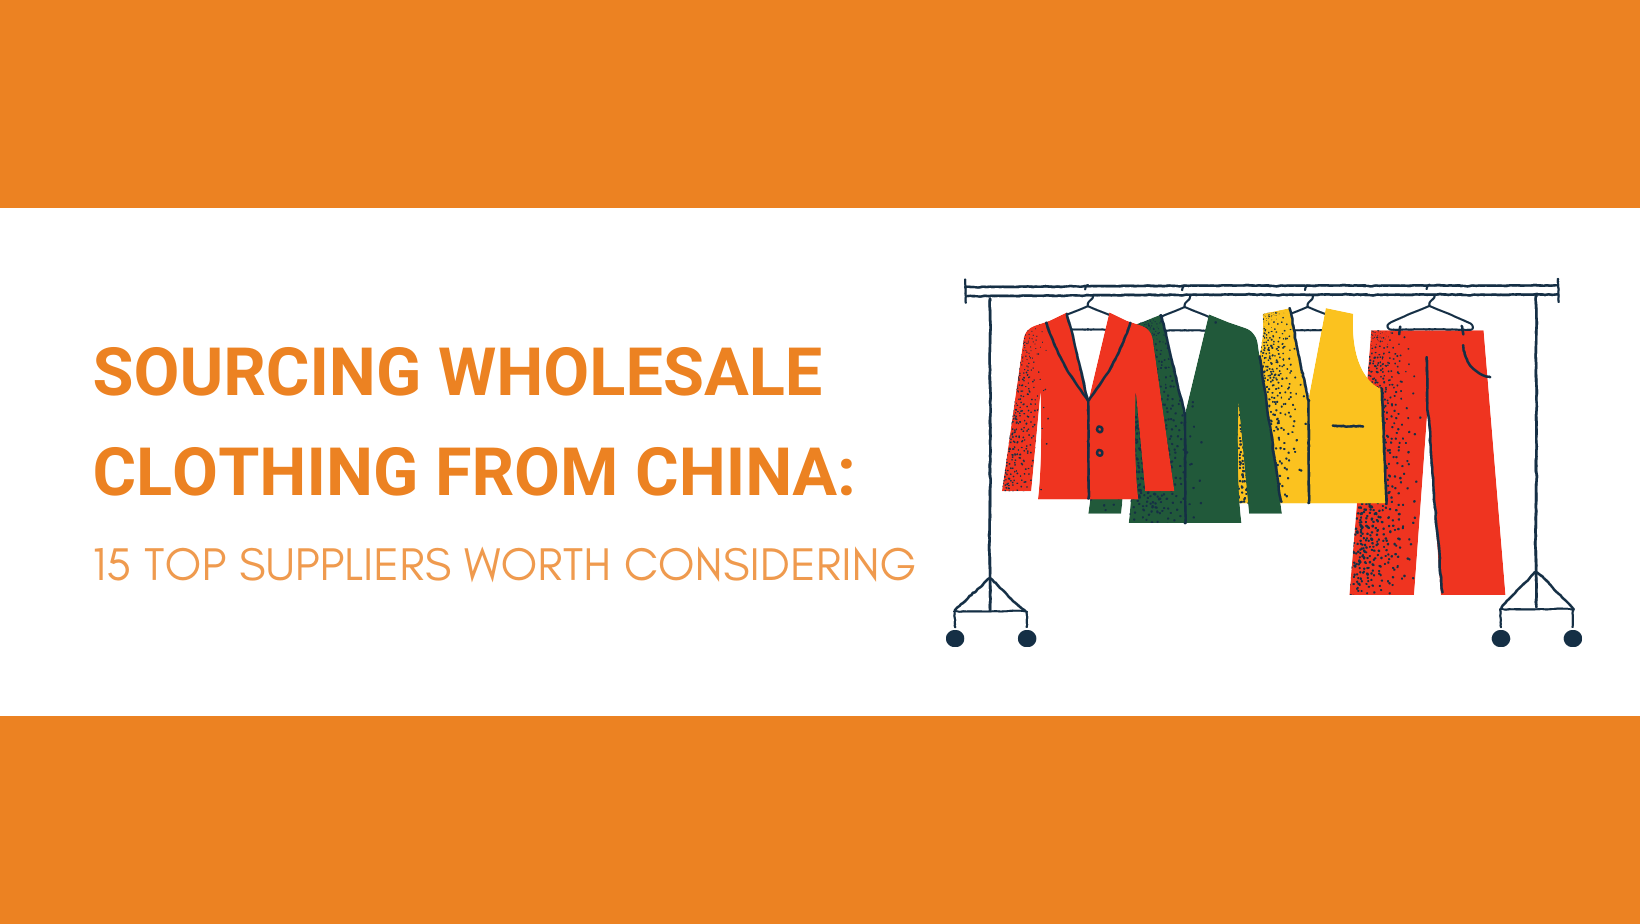 Sourcing Wholesale Clothing From China: 15 Top Suppliers Worth Considering